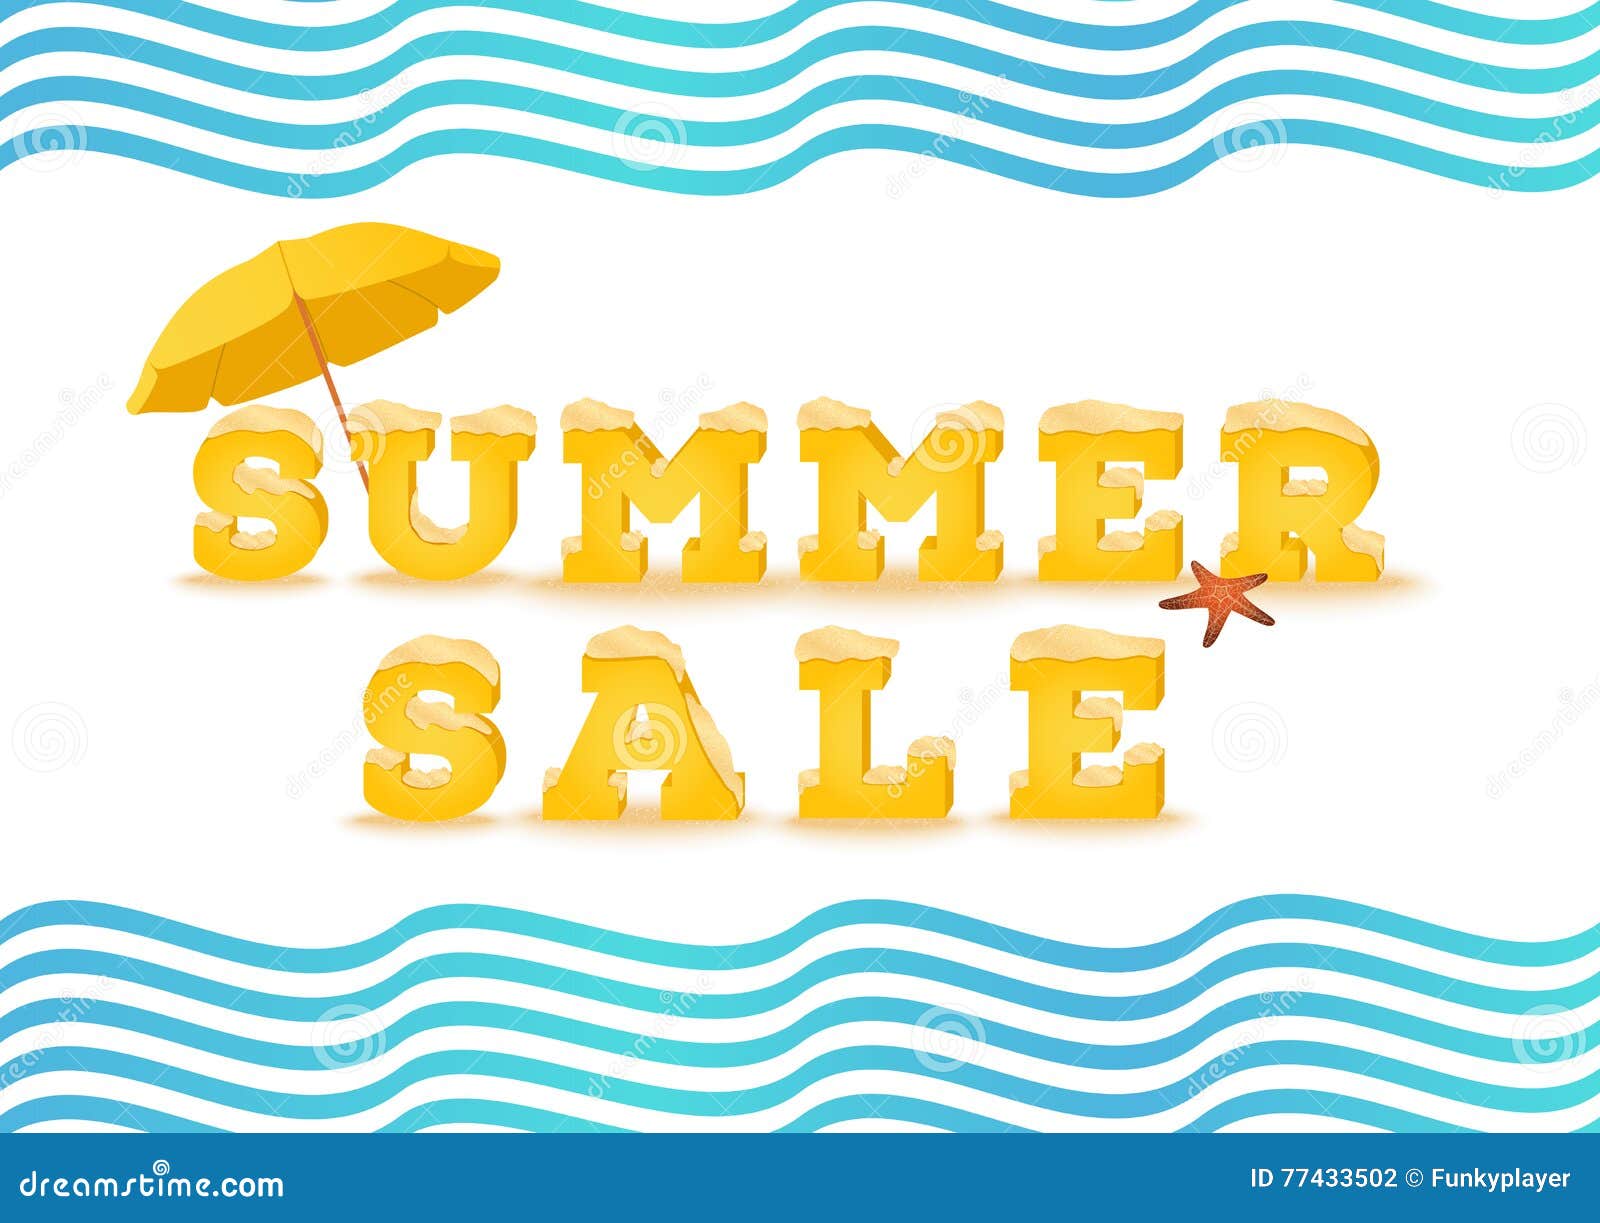 Summer Clearance Sale Stock Illustrations – 25,442 Summer